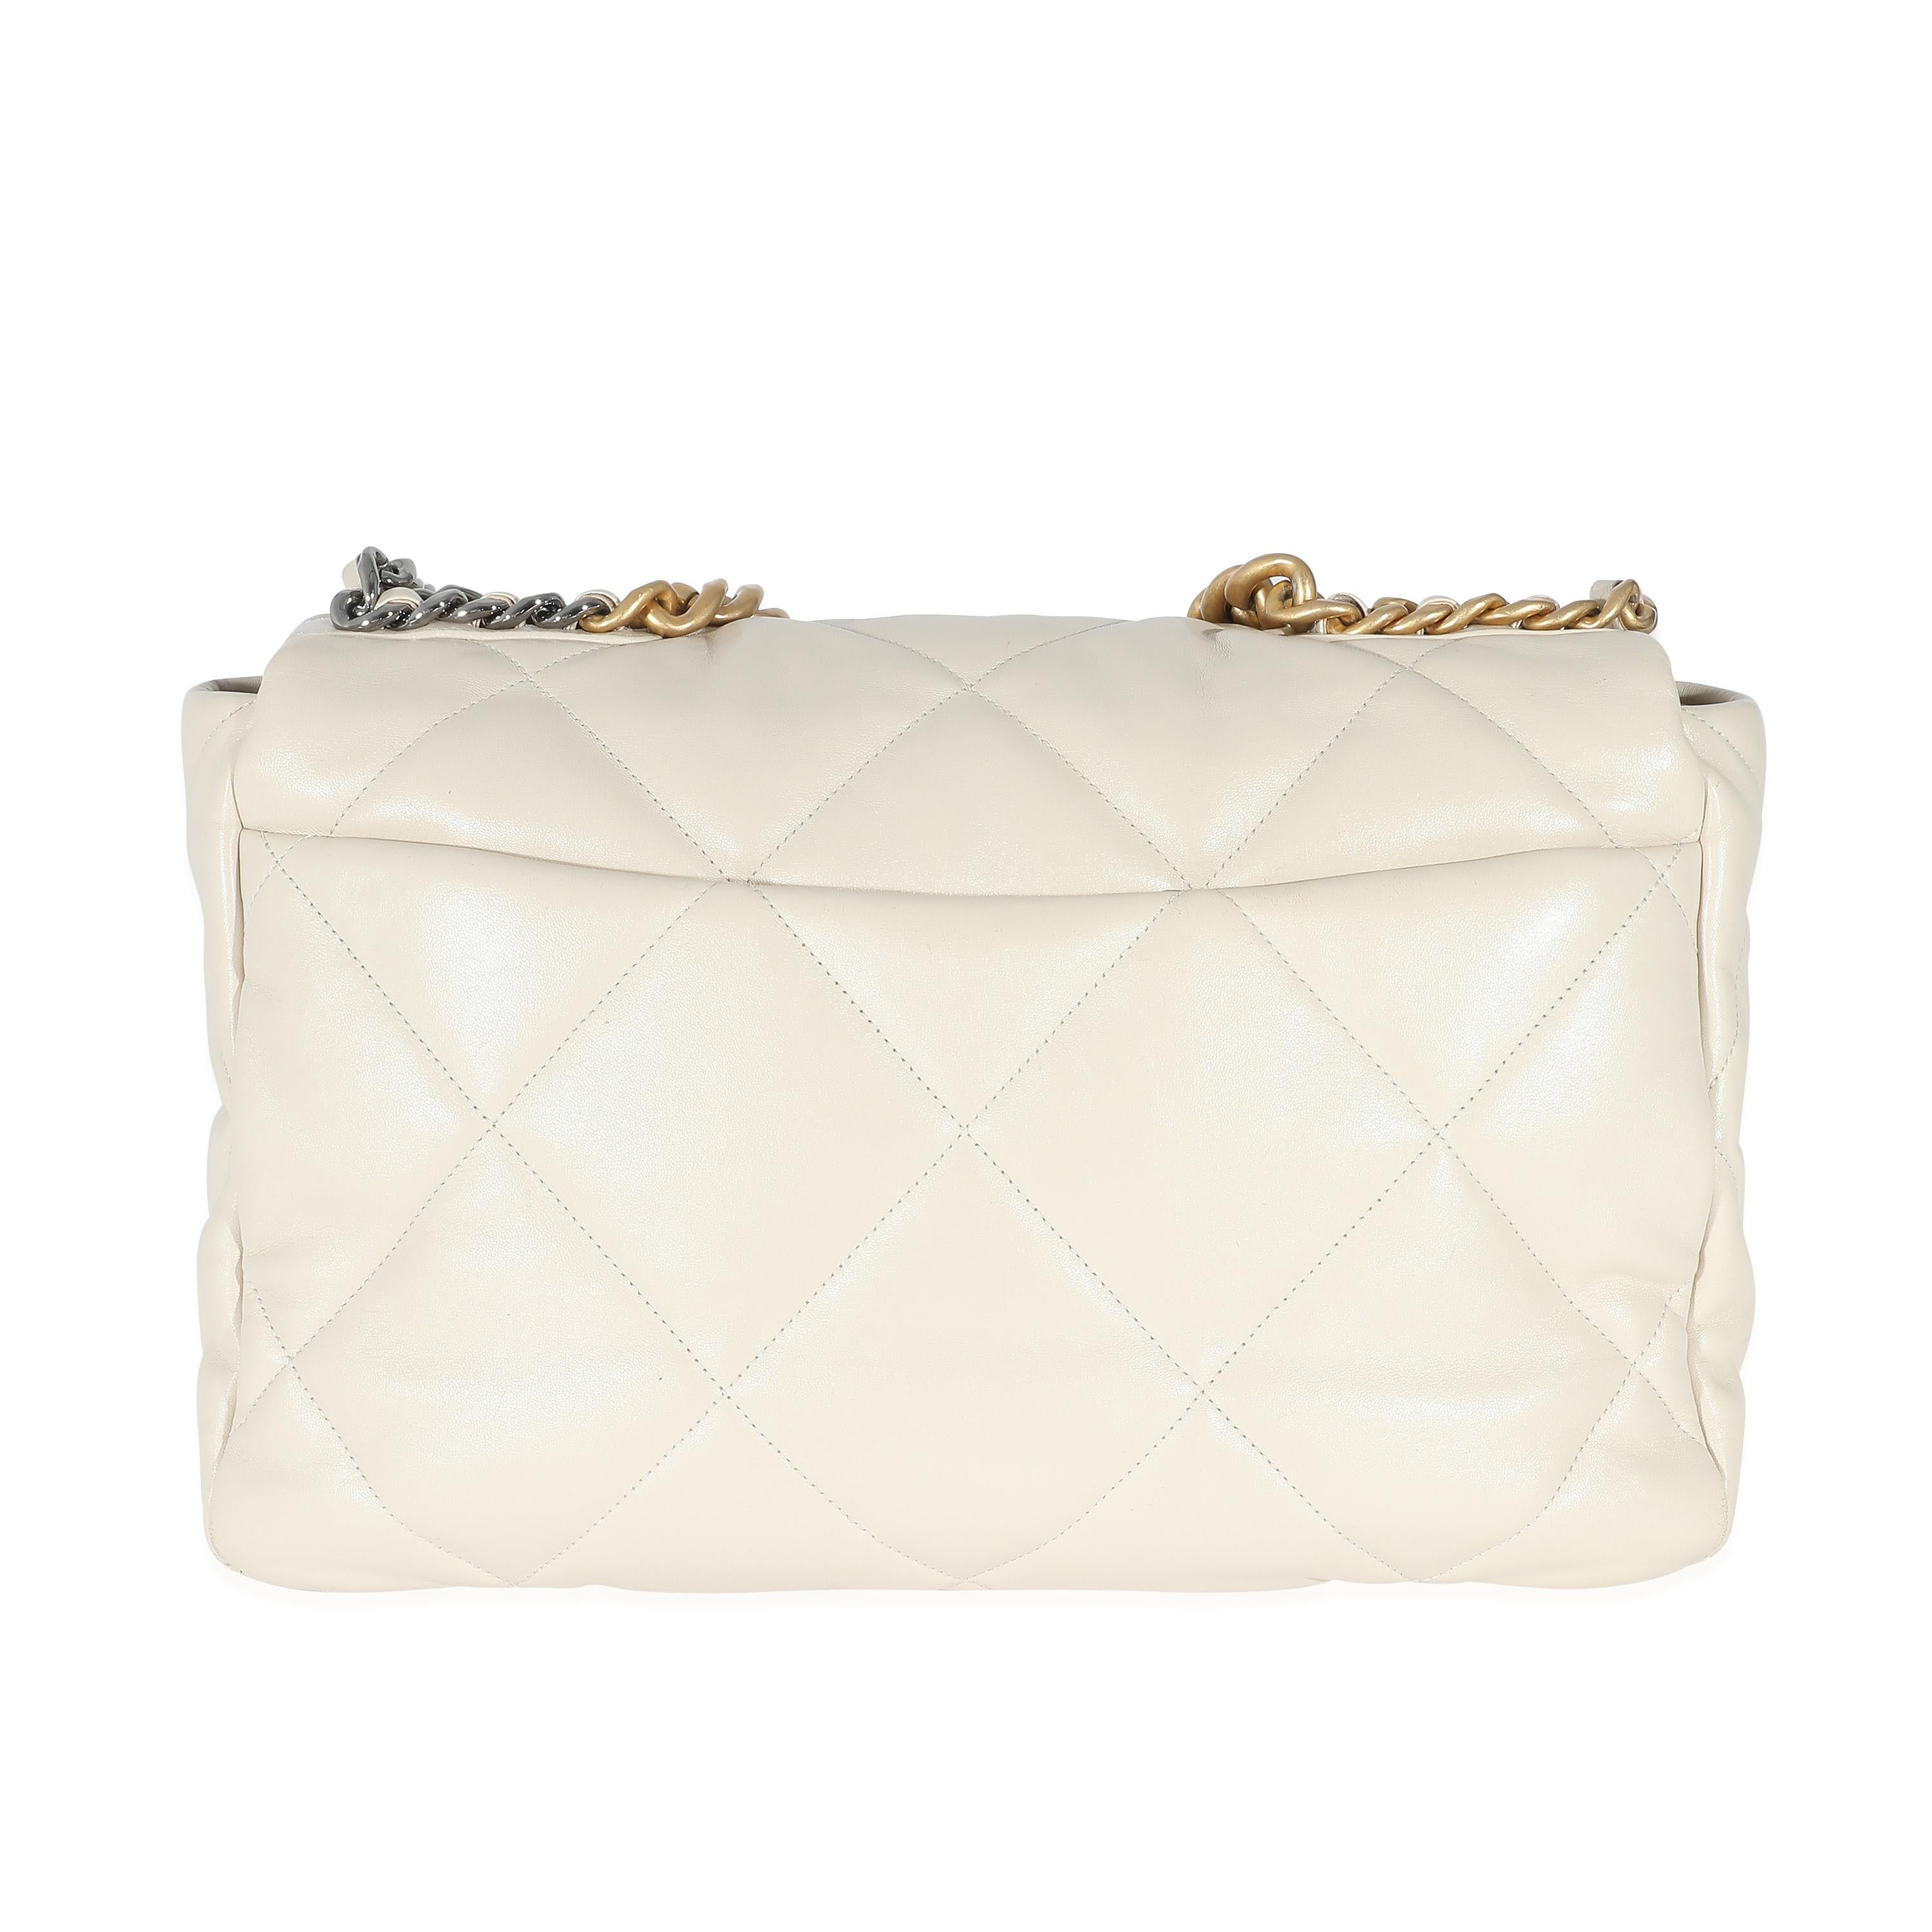 Beige Chanel Ivory Shiny Quilted Lambskin Maxi Chanel 19 Flap Bag